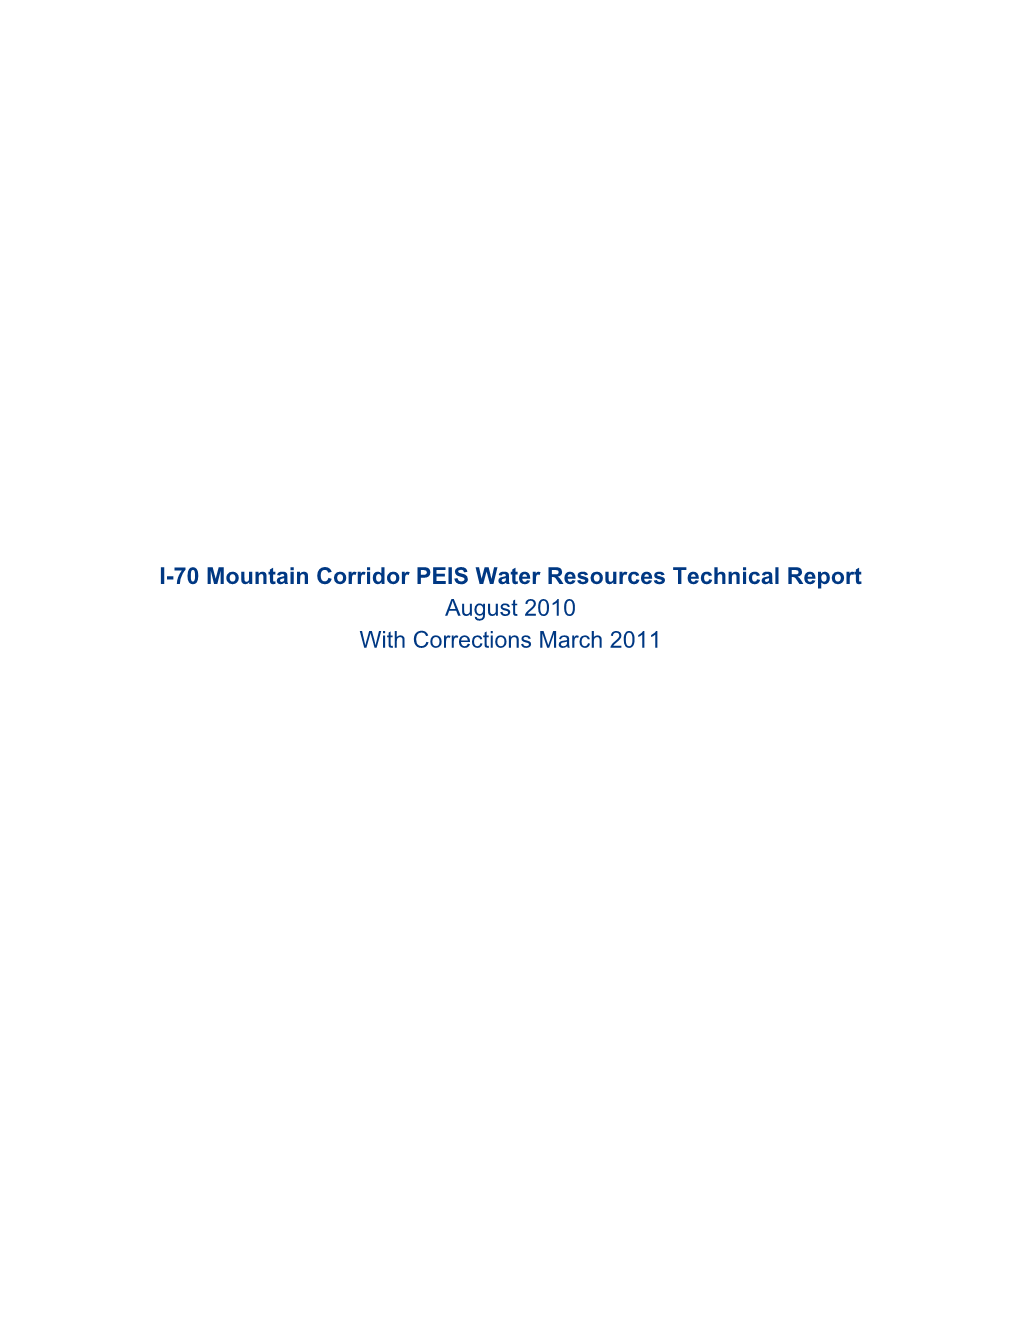 I-70 Mountain Corridor PEIS Water Resources Technical Report August 2010 with Corrections March 2011 Water Resources Technical Report